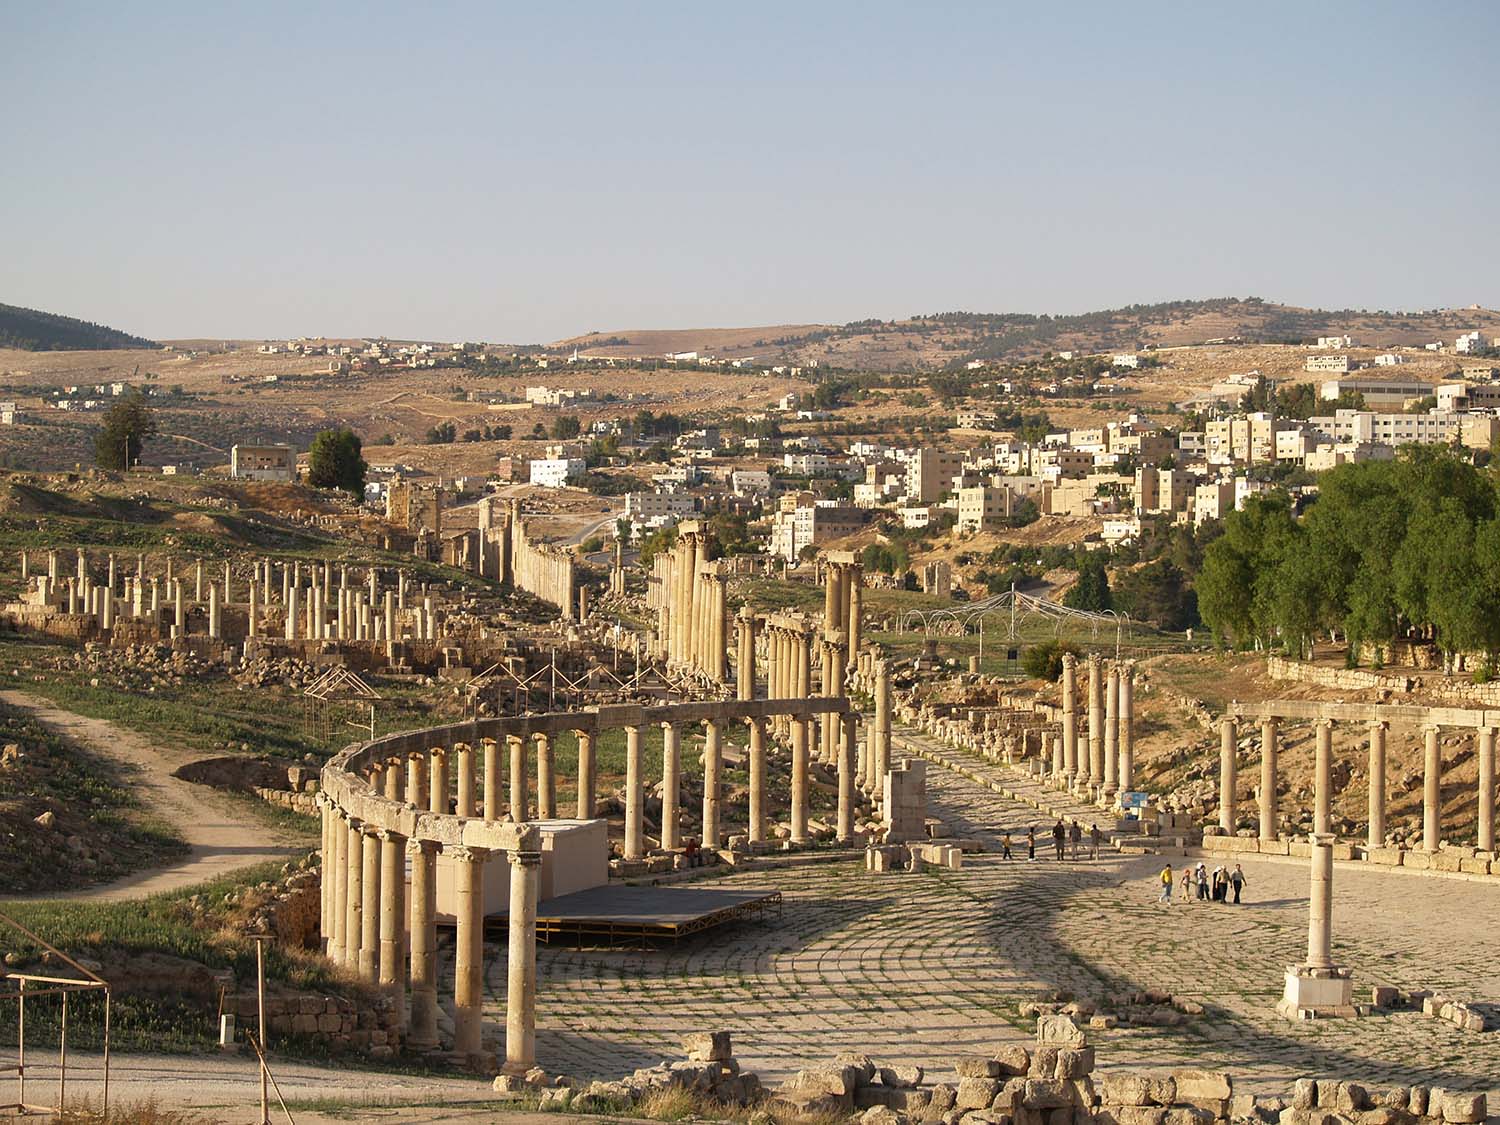 Northeast view of Gerasa; Oval Plaza in the foreground, Cardo extending into the background; Agora on left